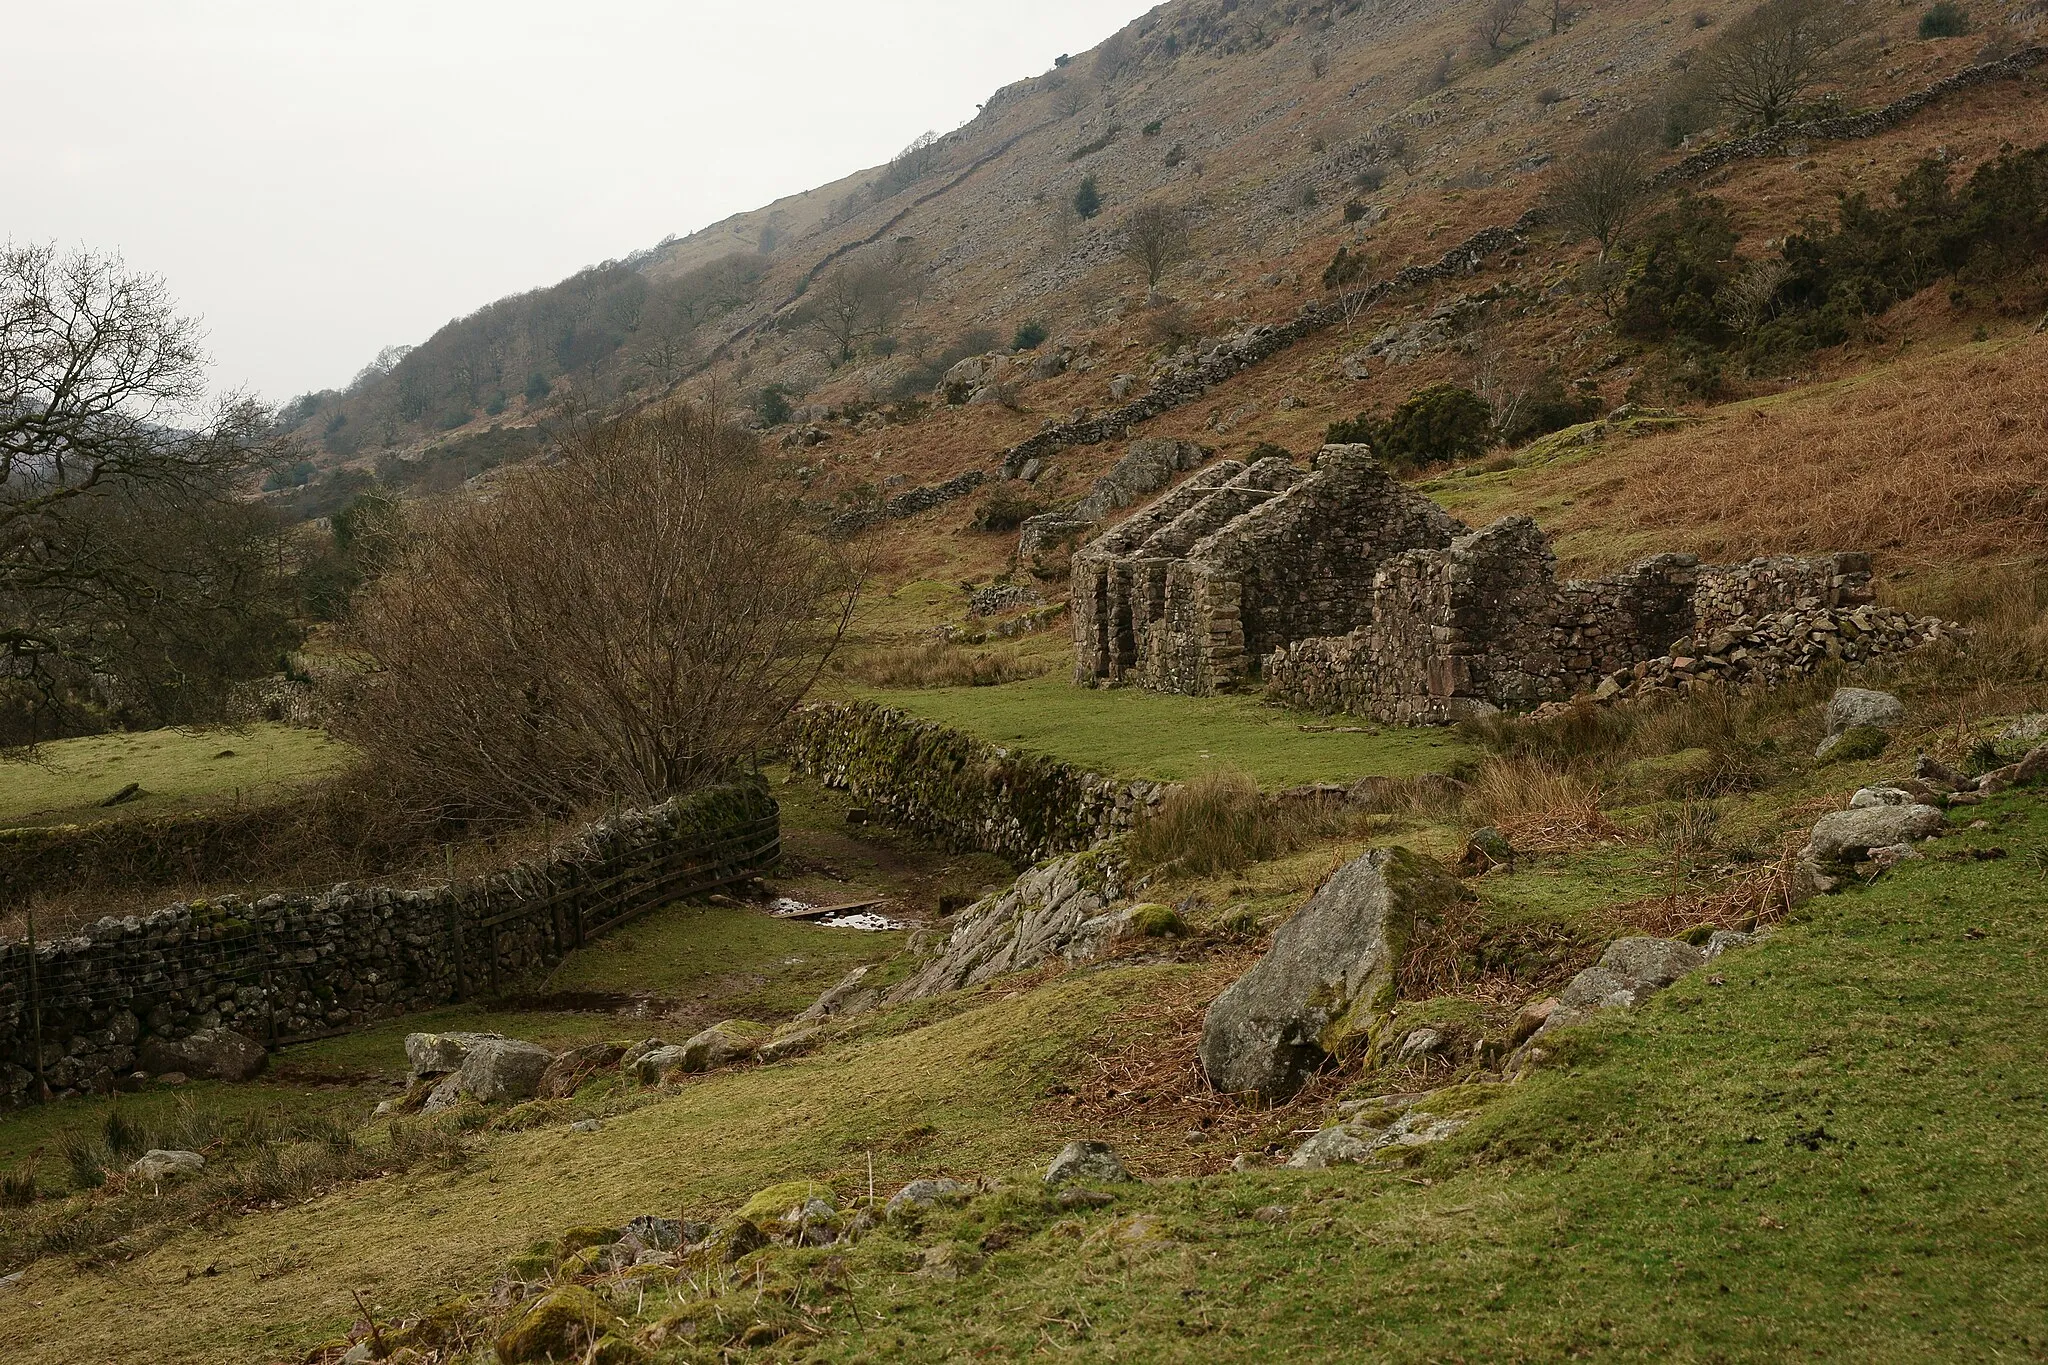 Photo showing: Ruins at Boot, Cumbria